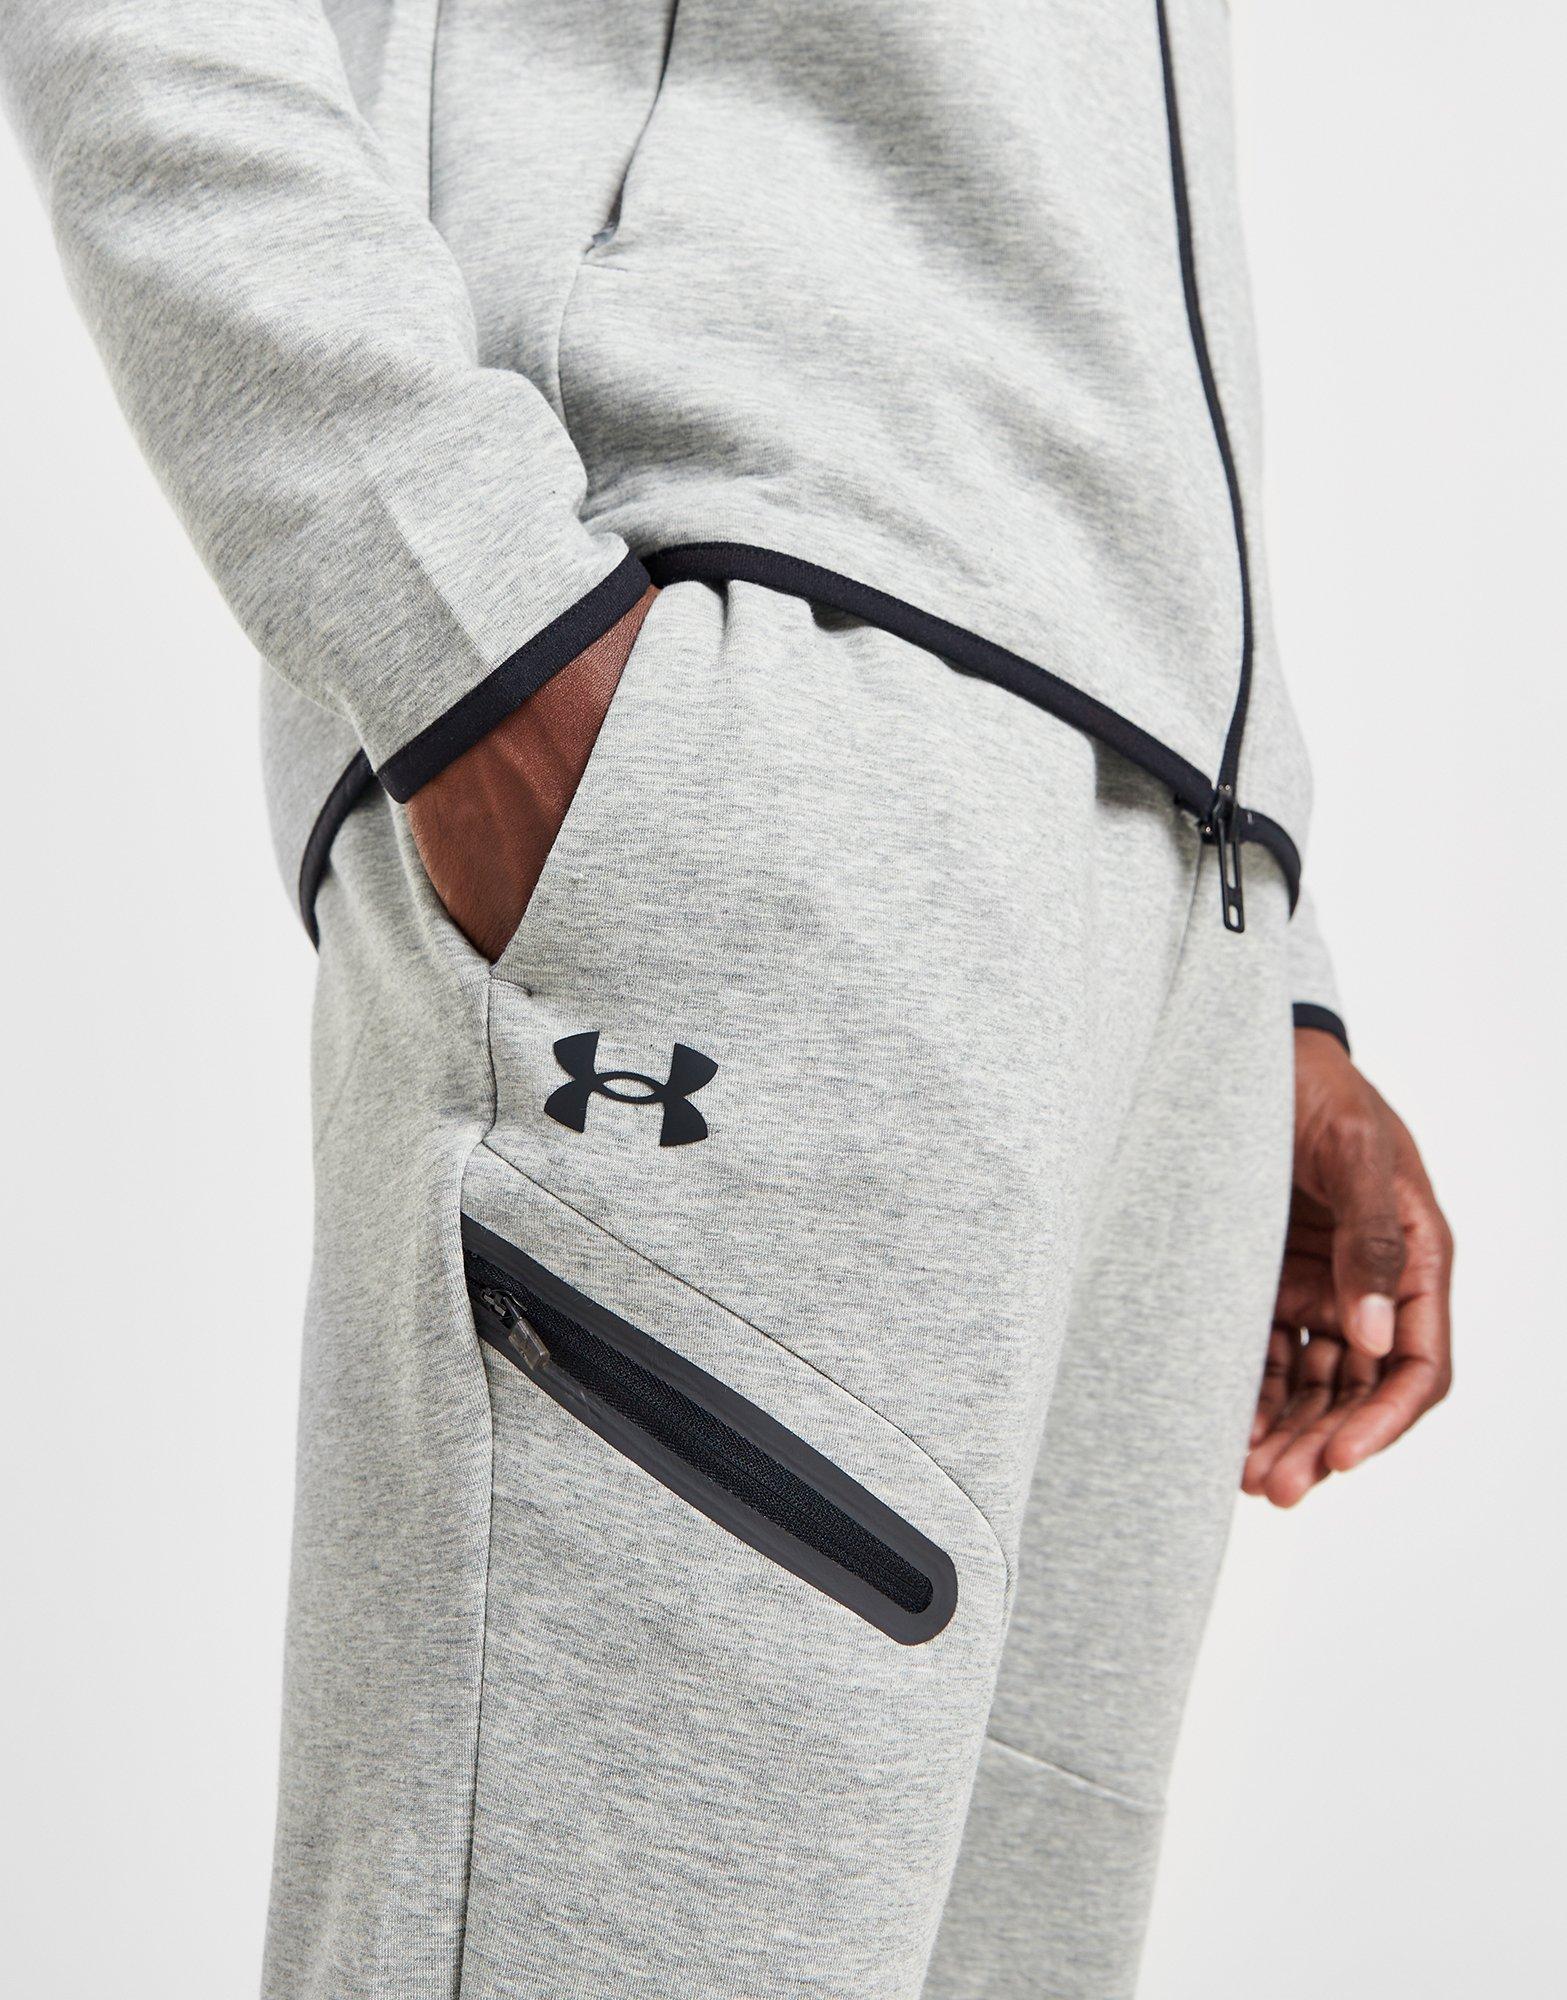 Grey Under Armour UA Unstoppable Fleece Joggers - JD Sports Global